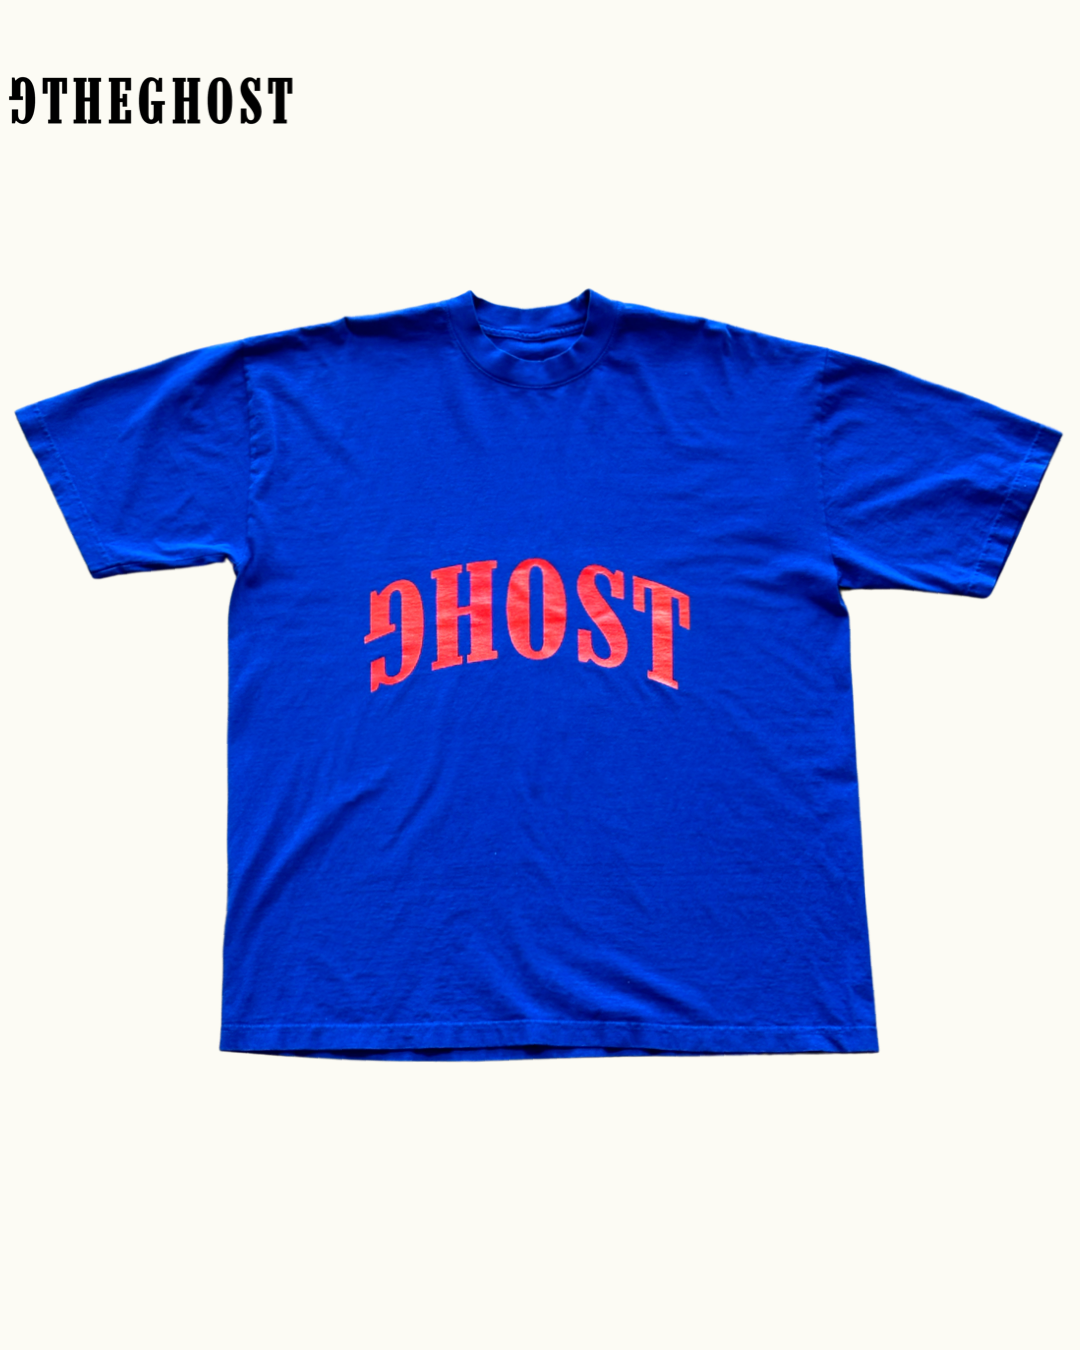 Ghost Tee (Blue/Red)